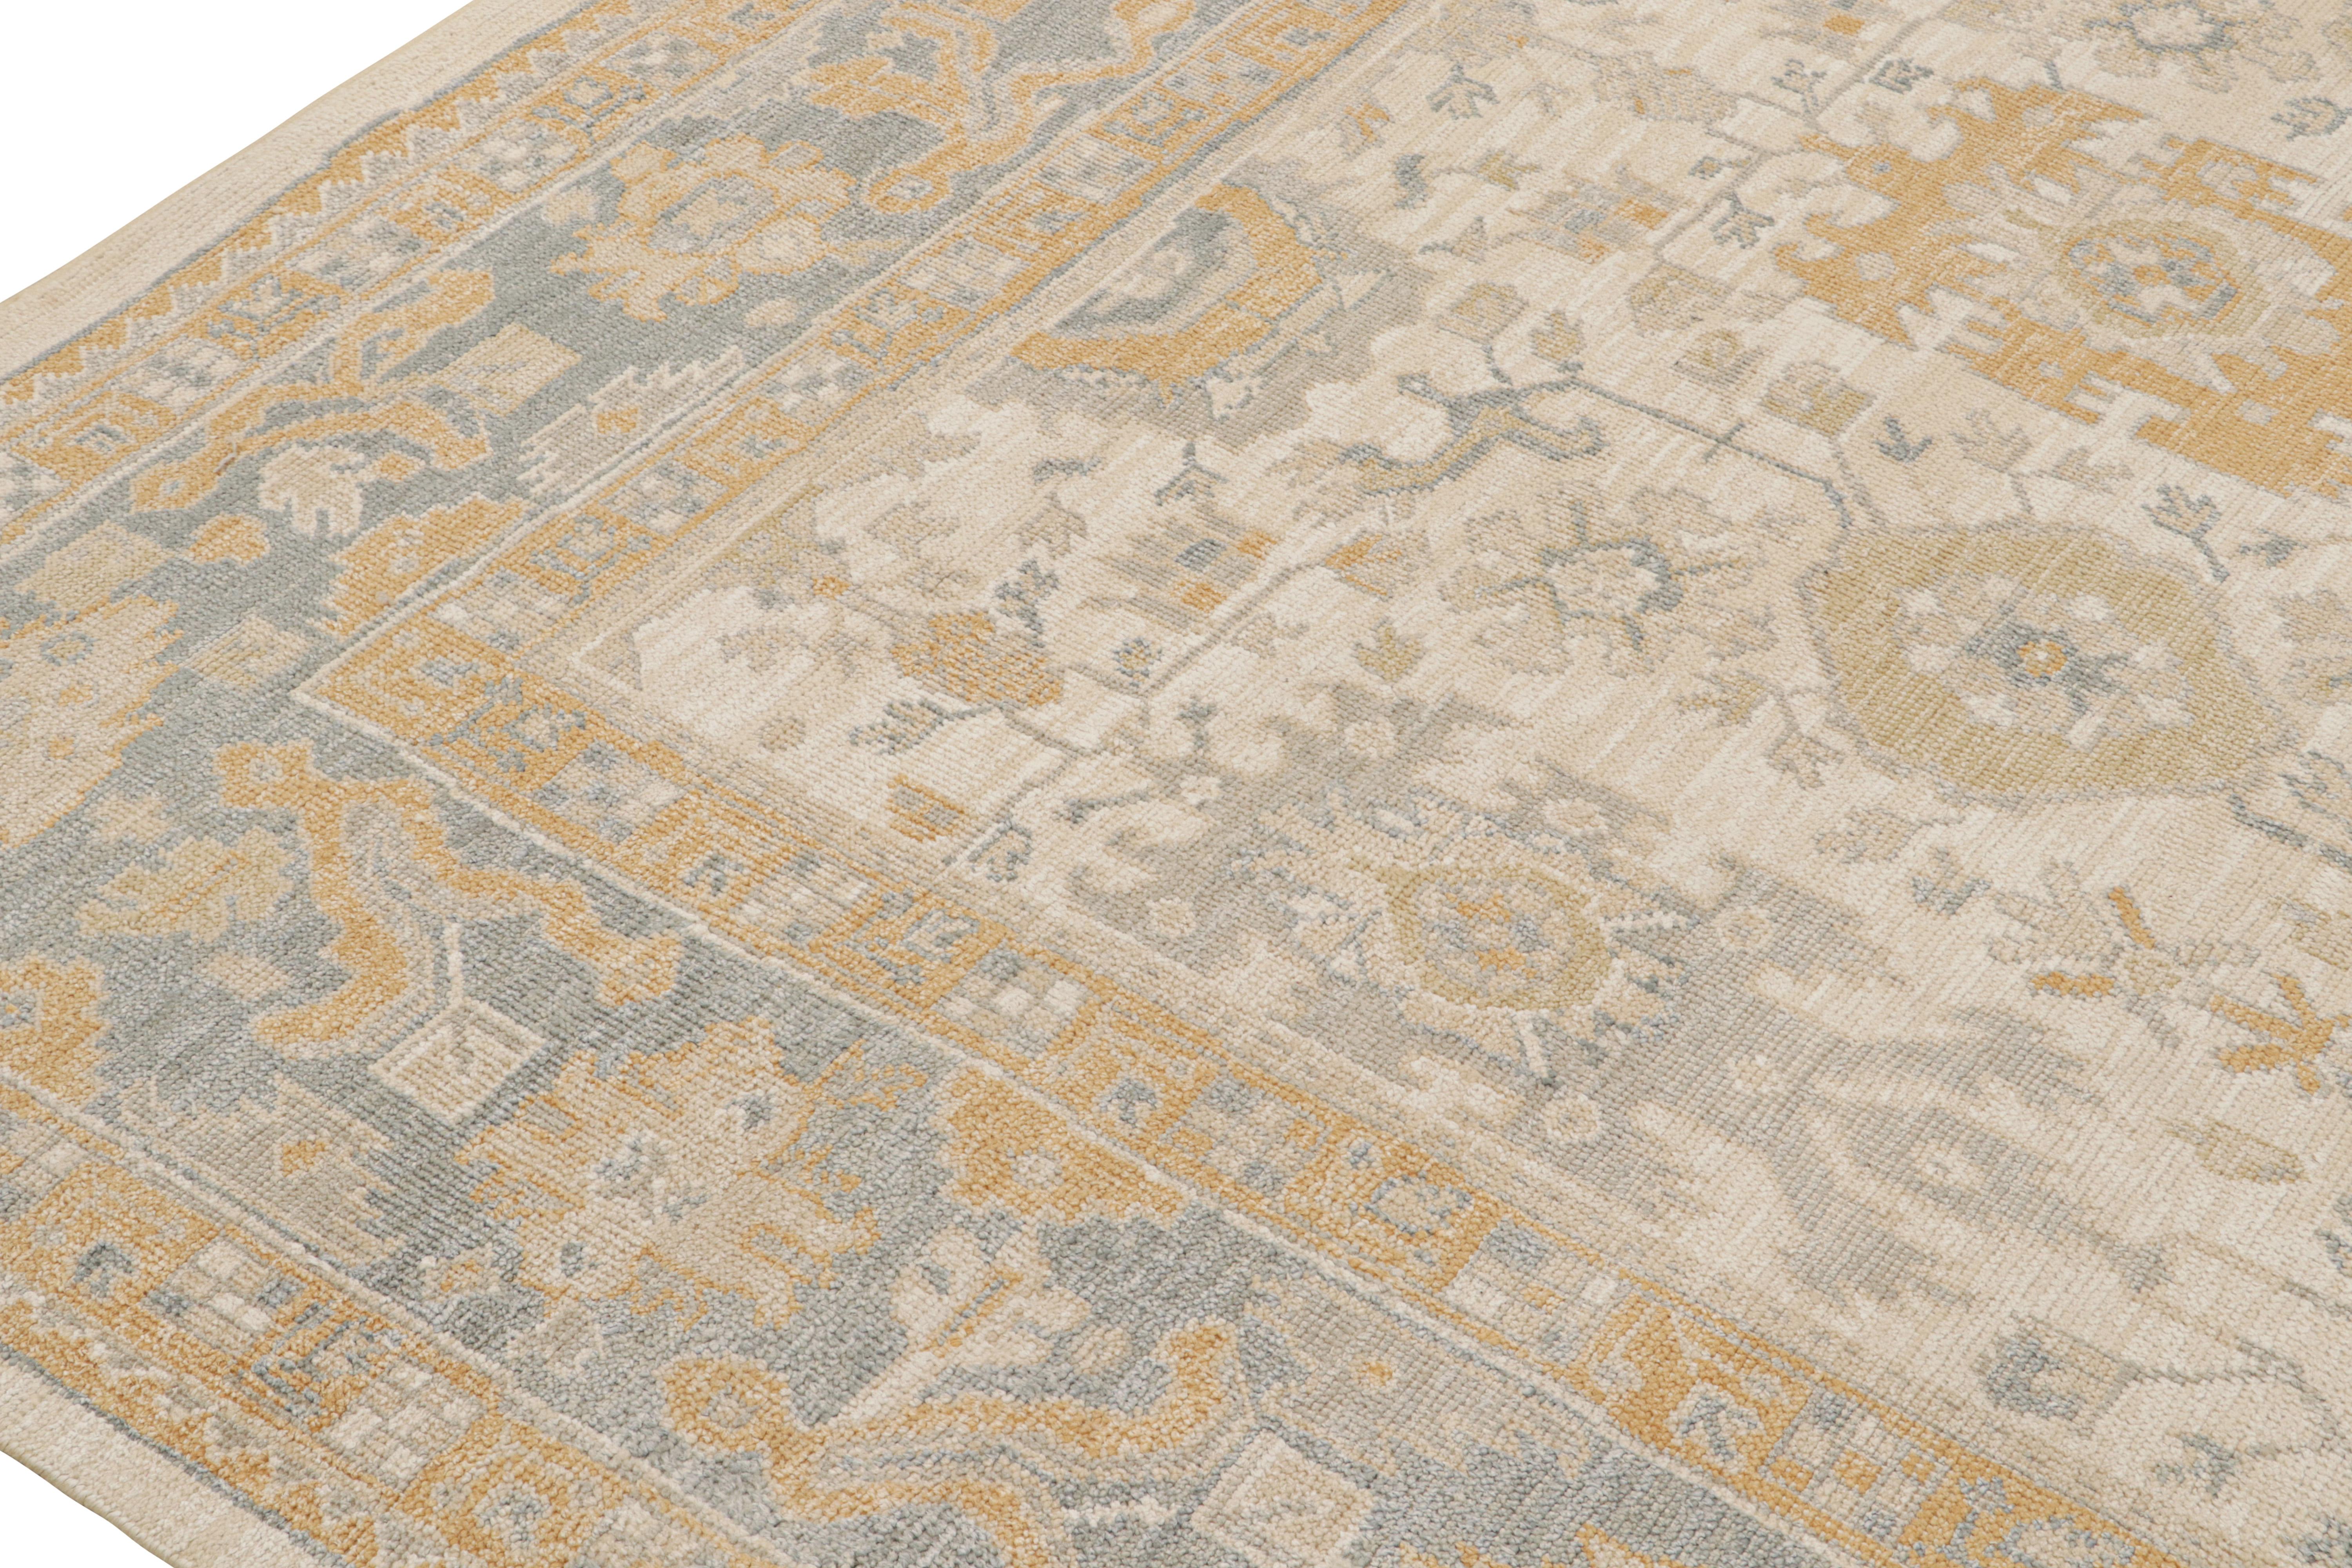 Rug & Kilim’s Oushak Style Rug in Beige, Gold and Blue Floral Patterns In New Condition For Sale In Long Island City, NY